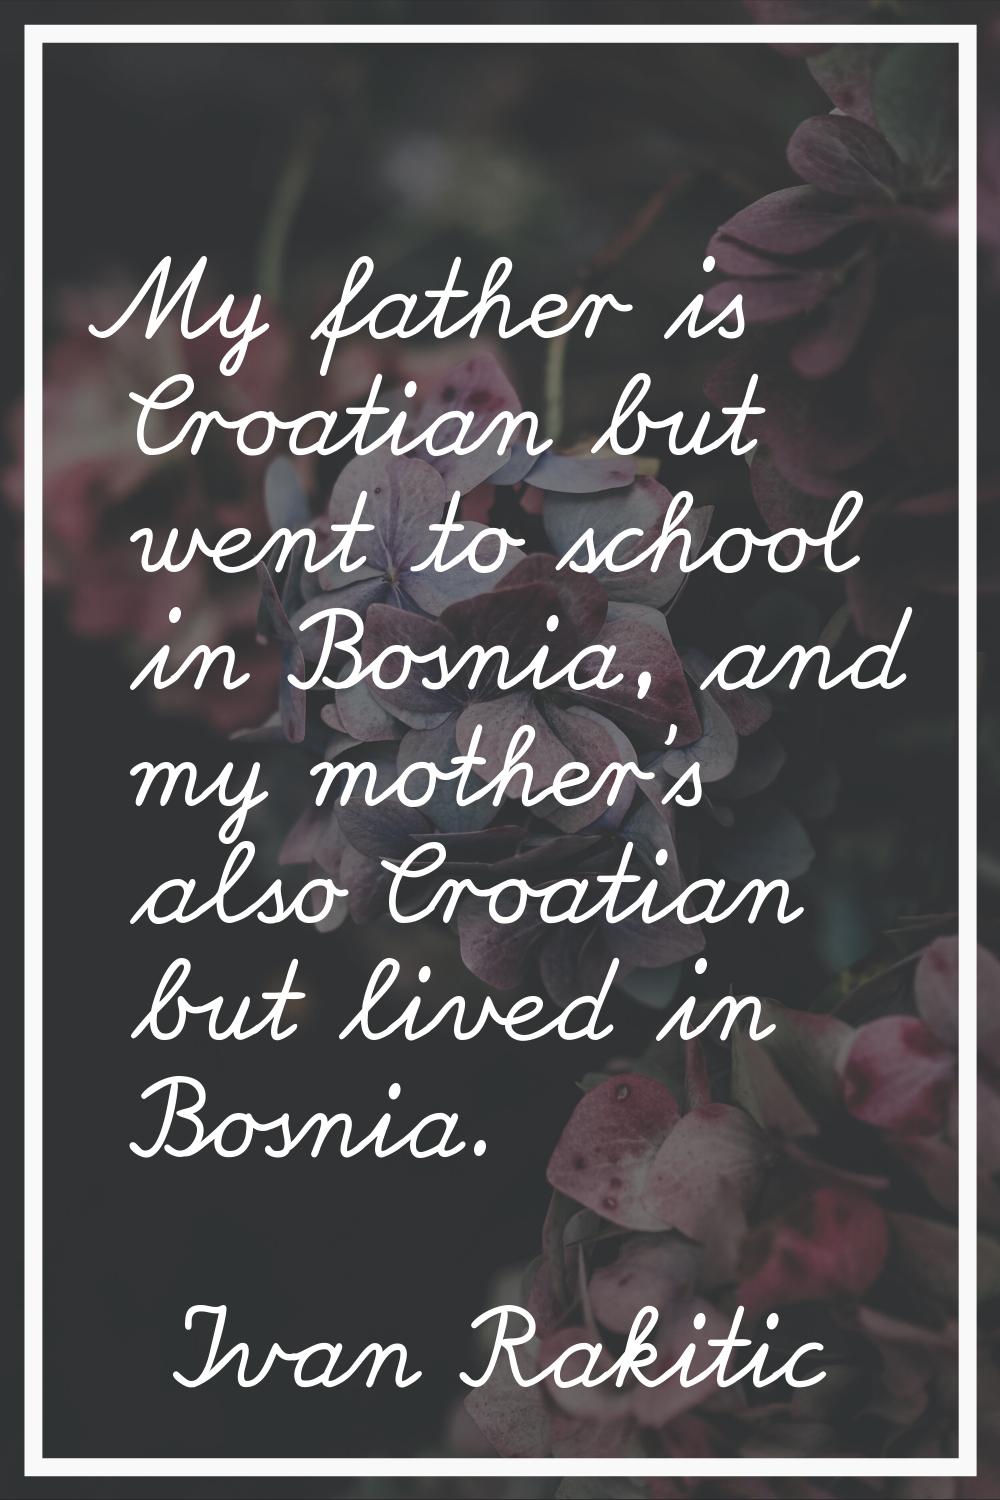 My father is Croatian but went to school in Bosnia, and my mother's also Croatian but lived in Bosn